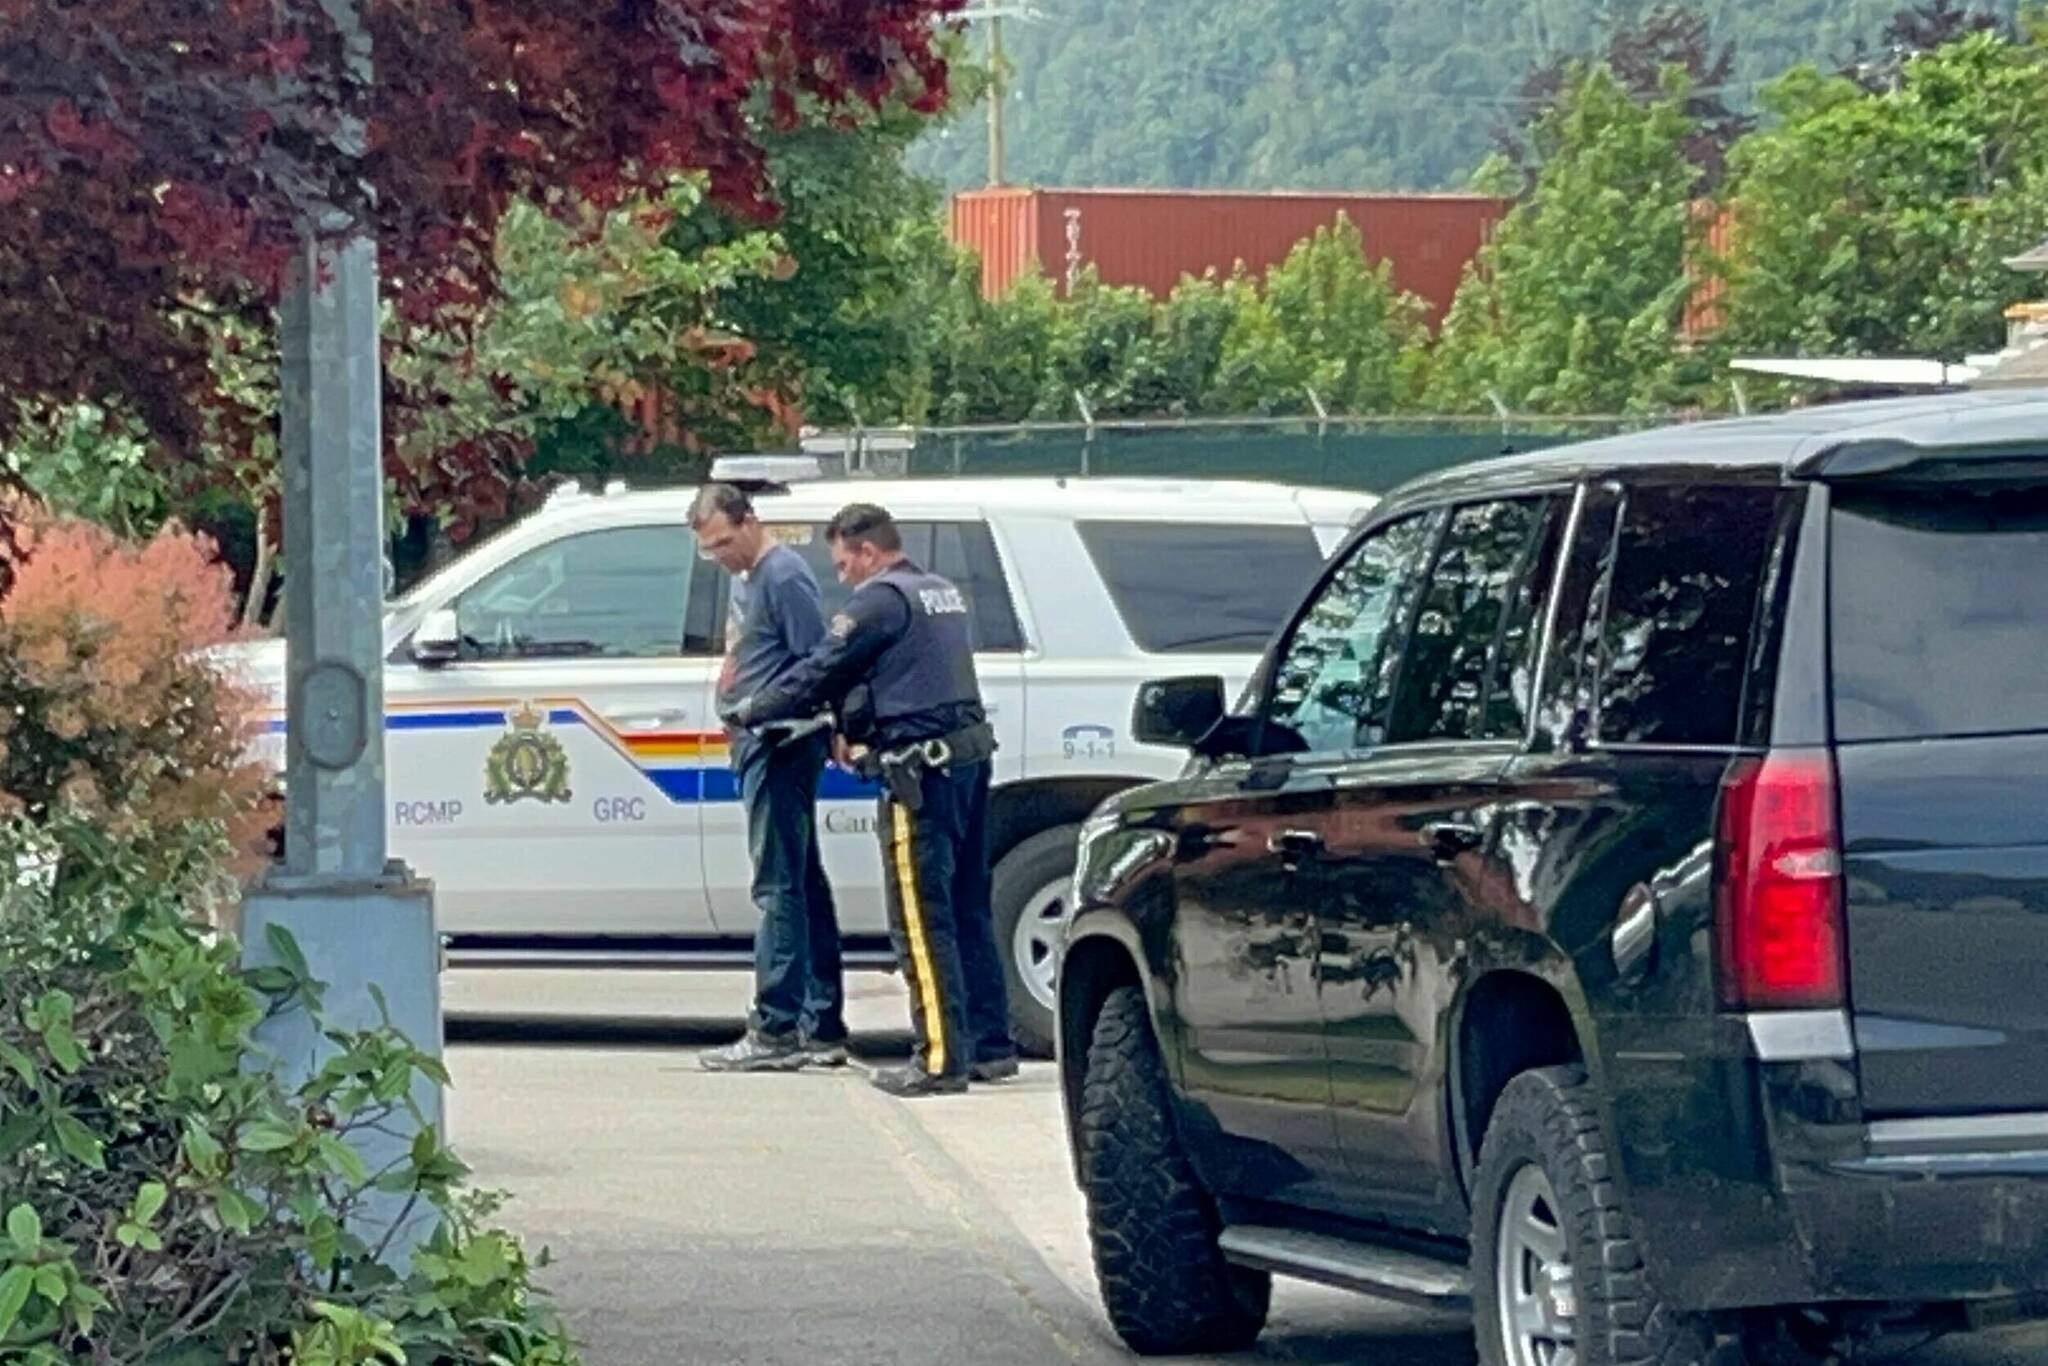 Ivan Styles of Agassiz was arrested on Wednesday (May 31) and has been charged with one count of child pornography possession. (Adam Louis/Observer)